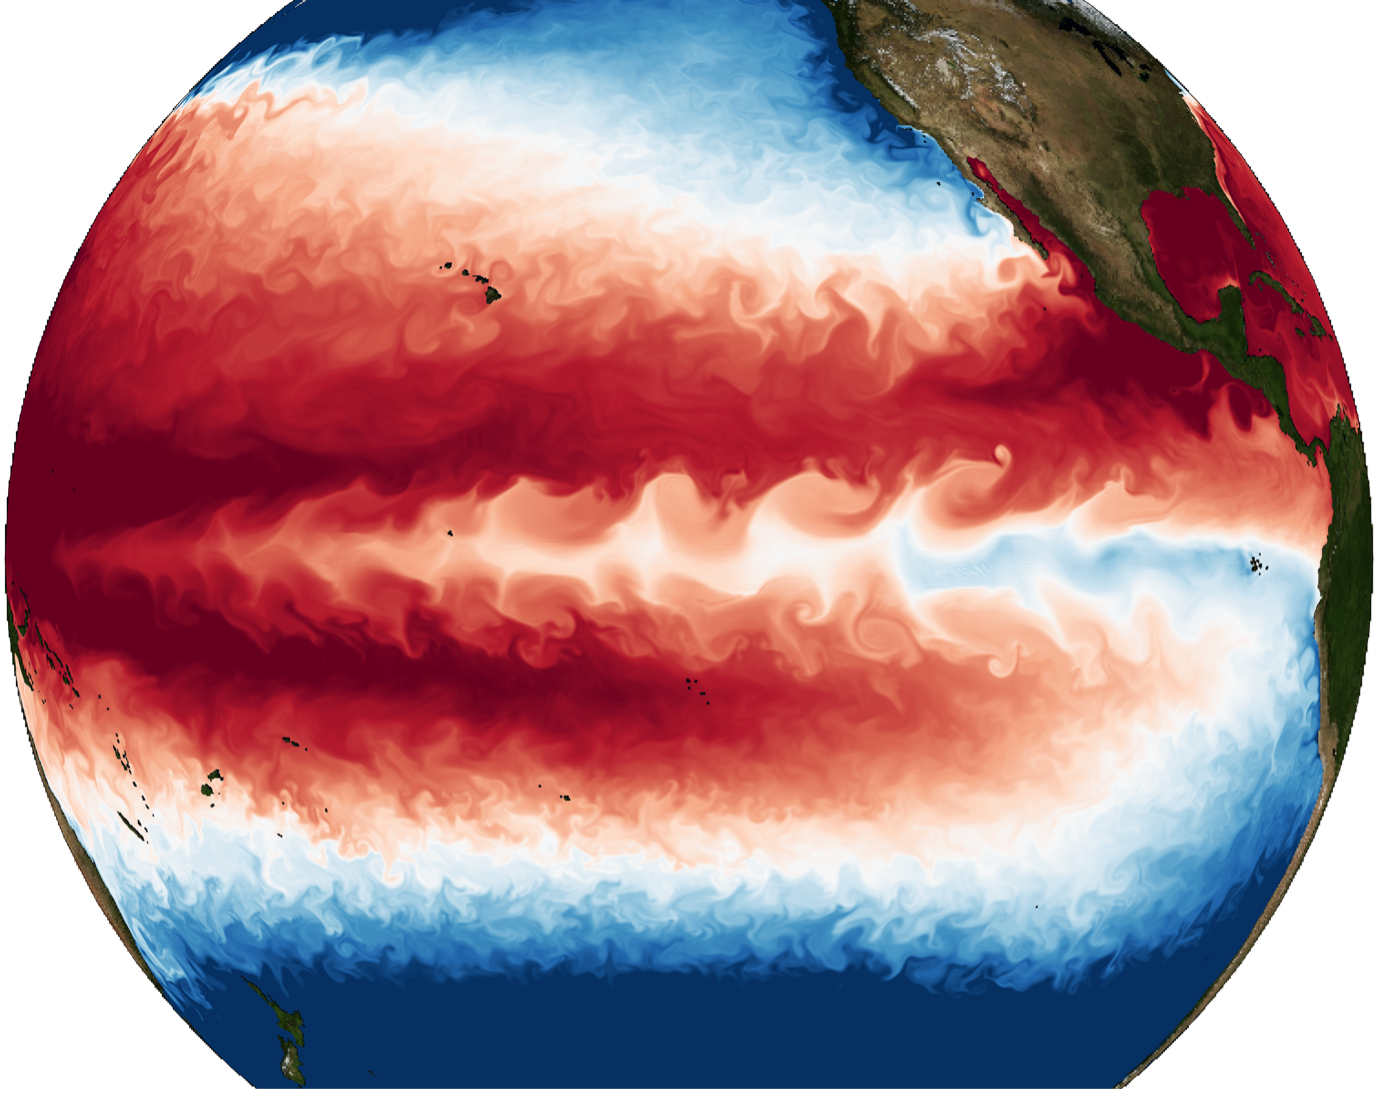 Figure 1. (Surface ocean temperatures simulated at unprecedented resolution using a coupled atmosphere-ocean model. The extensive wavy cold structure in the equatorial Pacific corresponds to a tropical instability wave. Simulations were conducted on the IBS/ICCP supercomputer Aleph.